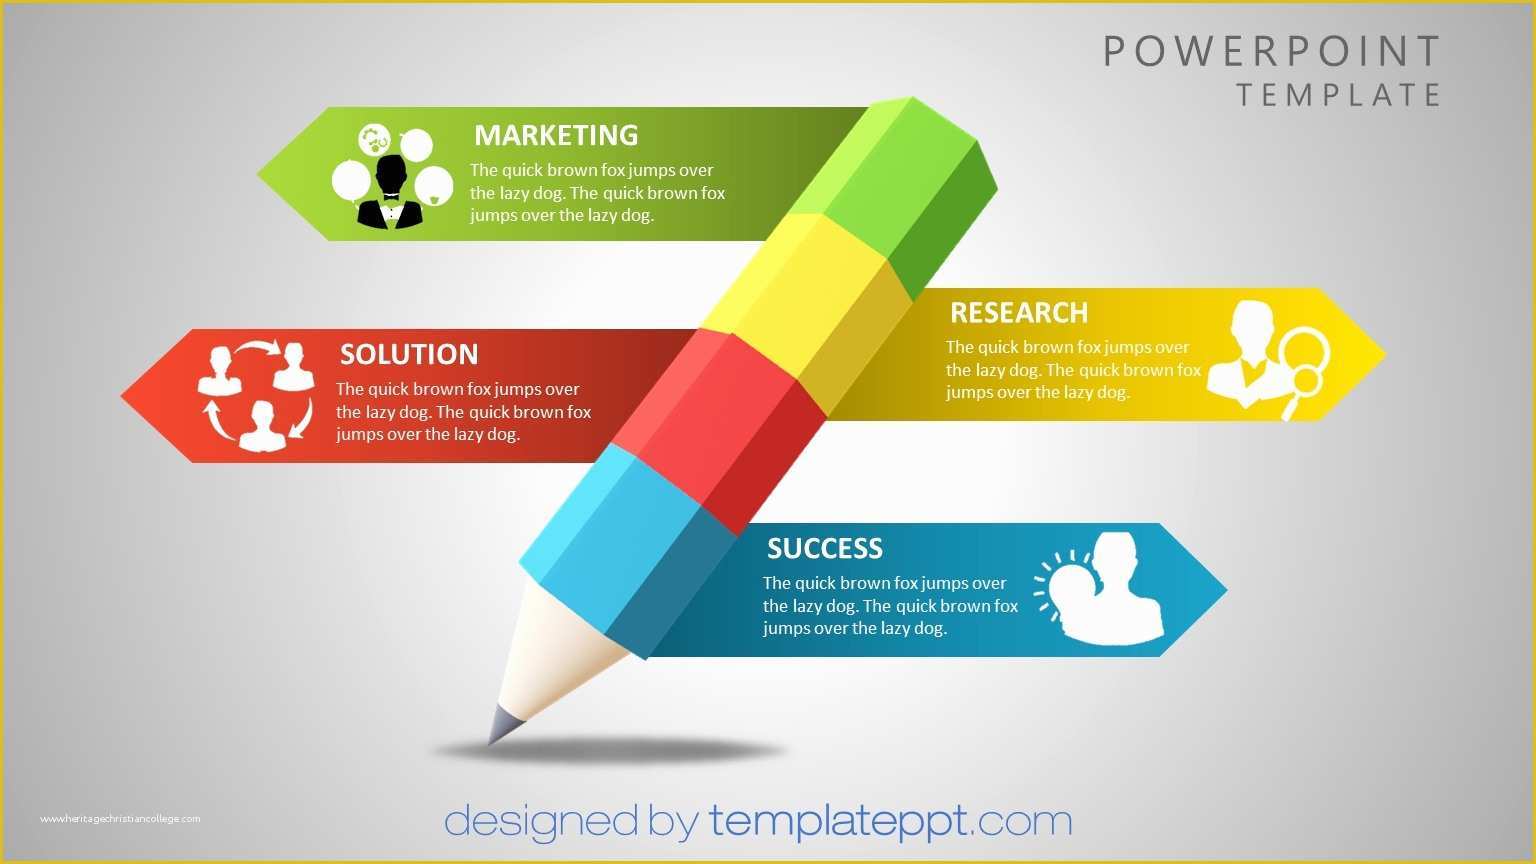 Best Ppt Templates Free Download 2018 Of Best Ppt Templates Free Download 2018